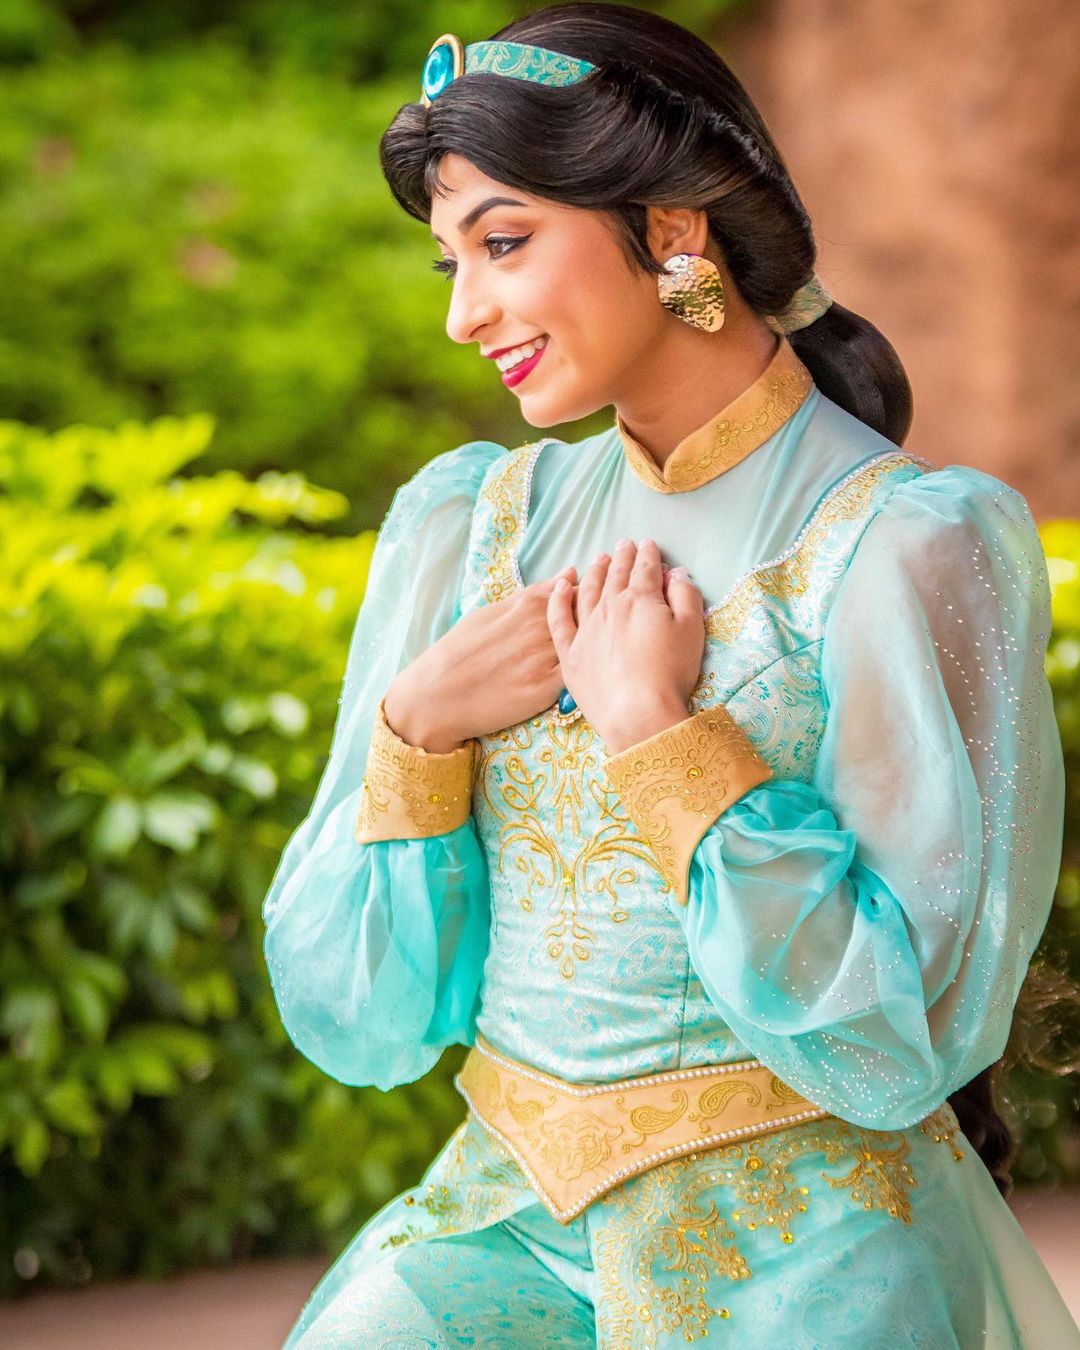 Princess Jasmine in the Morocco Pavilion at Epcot for Photo